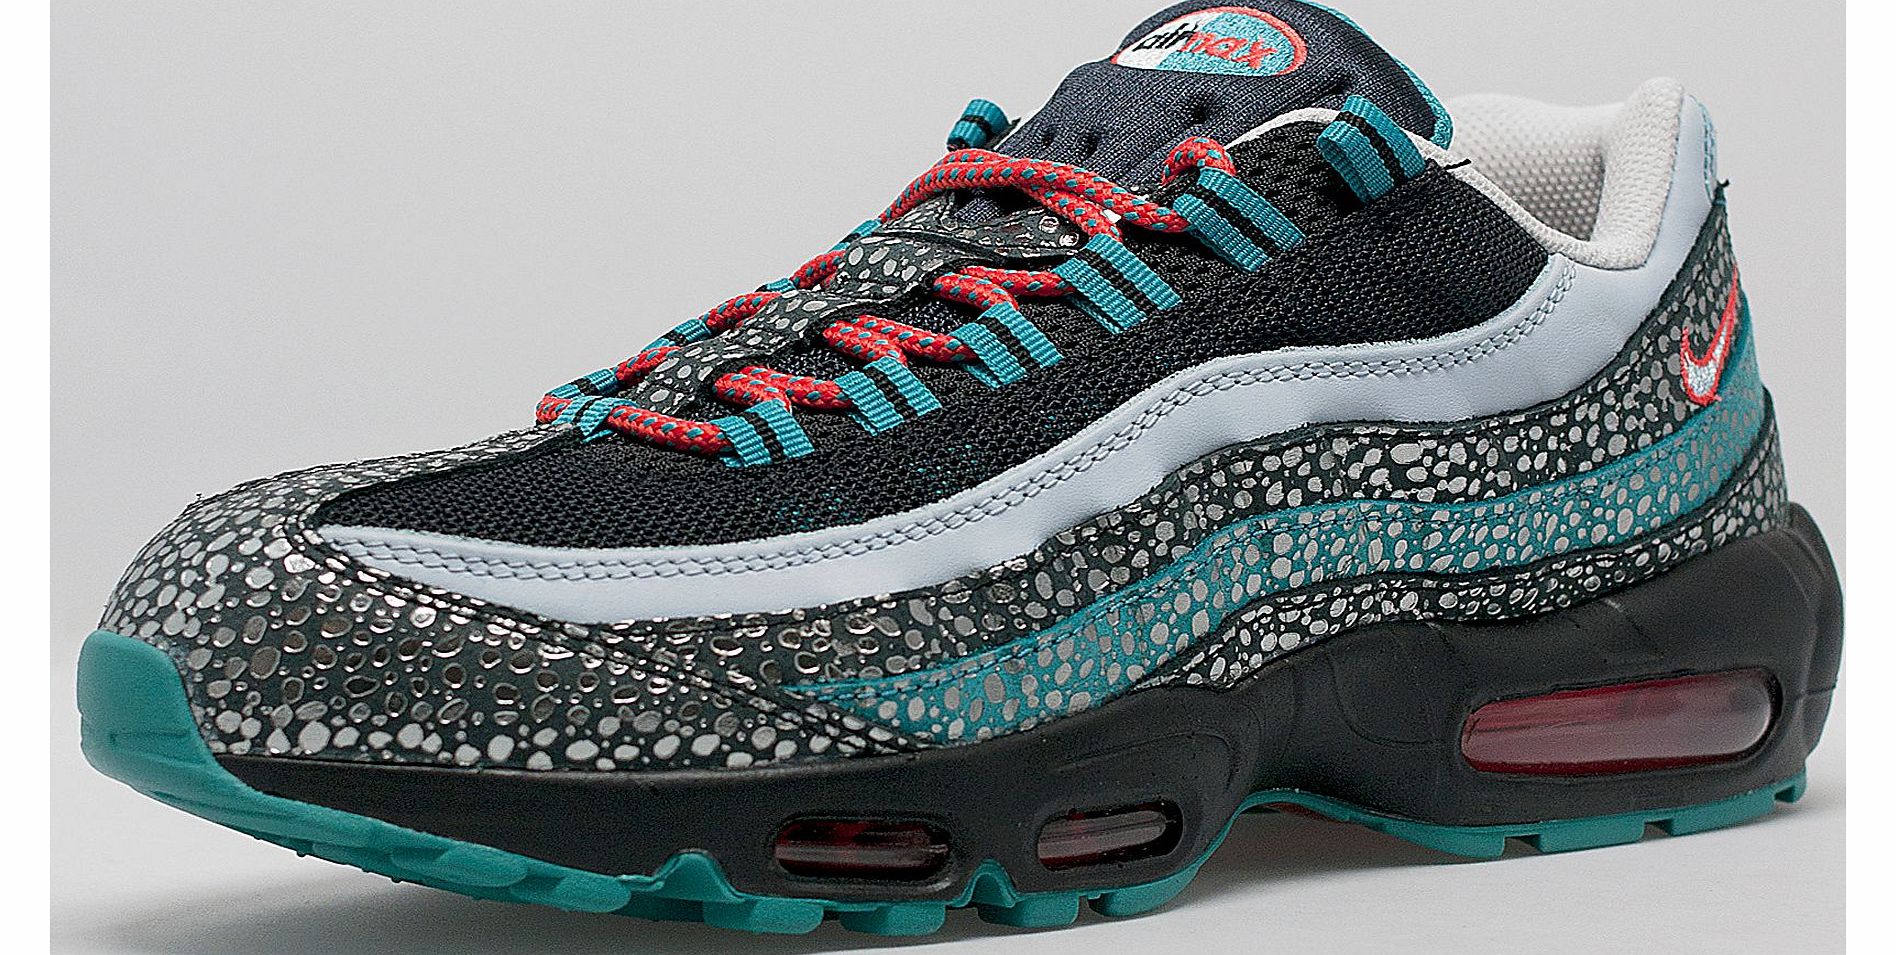 Nike Air Max 95 Deluxe QS